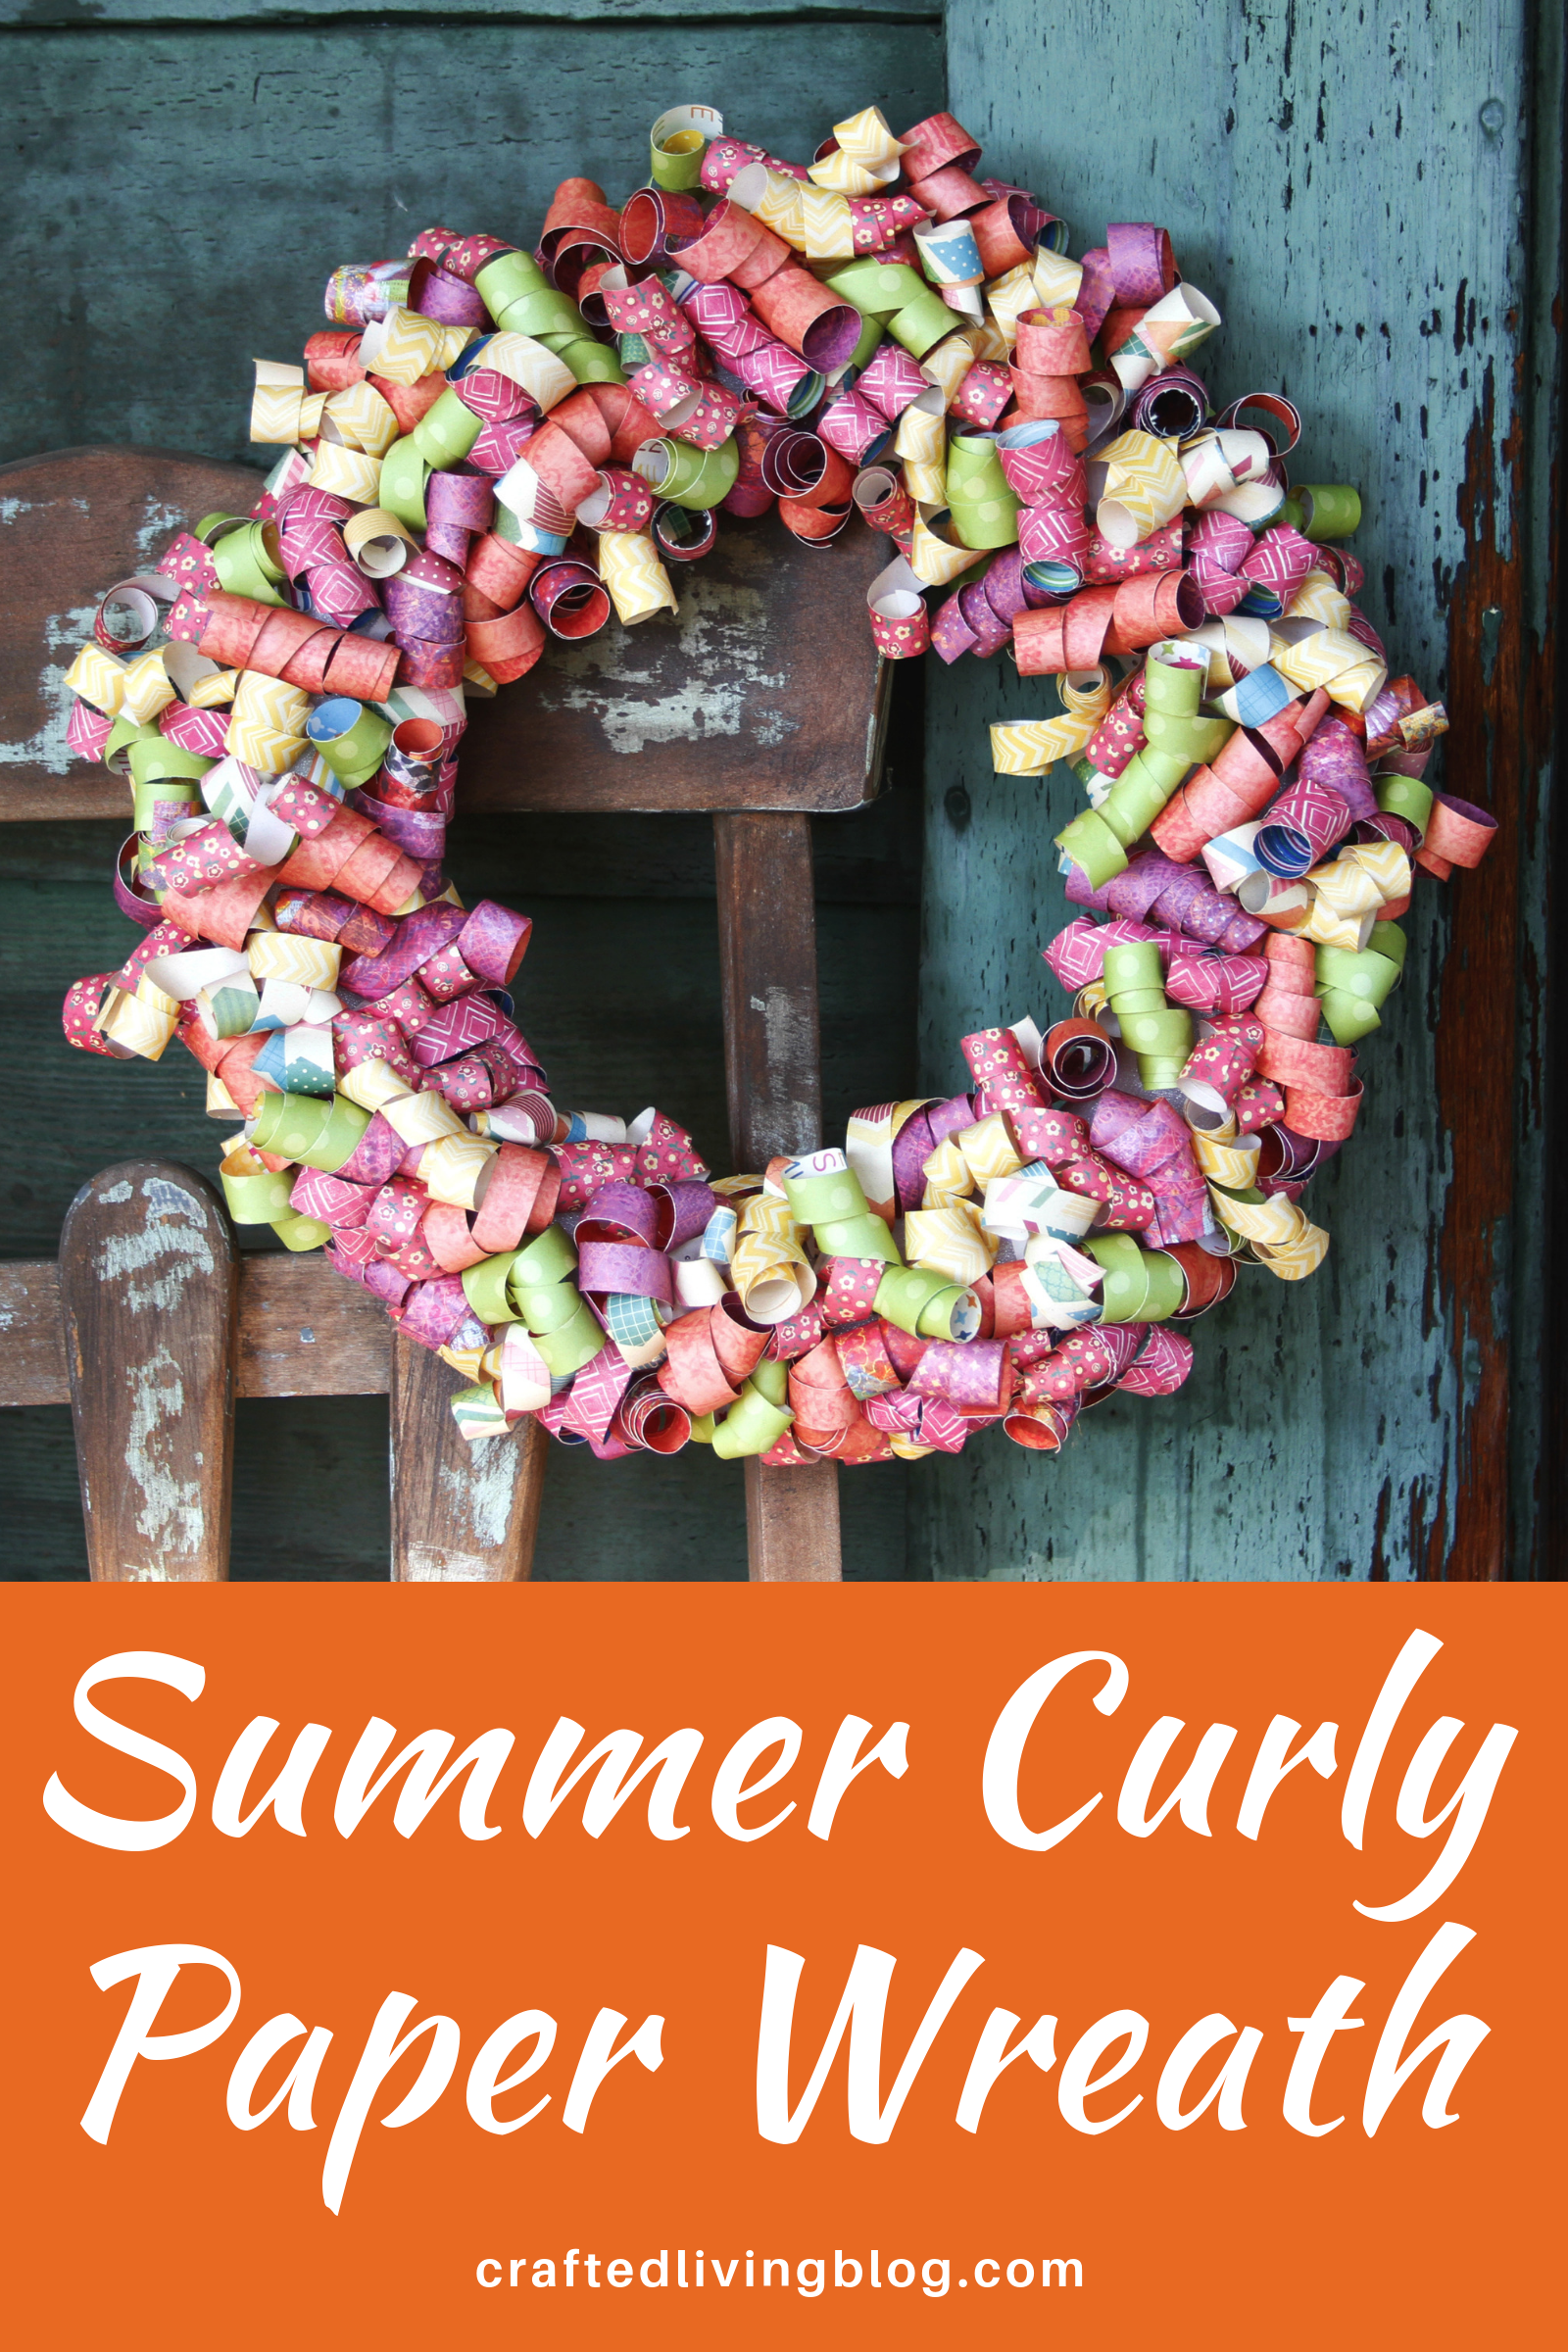 Make this easy DIY wreath to add festive style to your front door or porch. By following the simple step-by-step tutorial, you'll have a beautiful wreath in a few hours! #craftedliving #diycrafts #wreaths #summerdecor